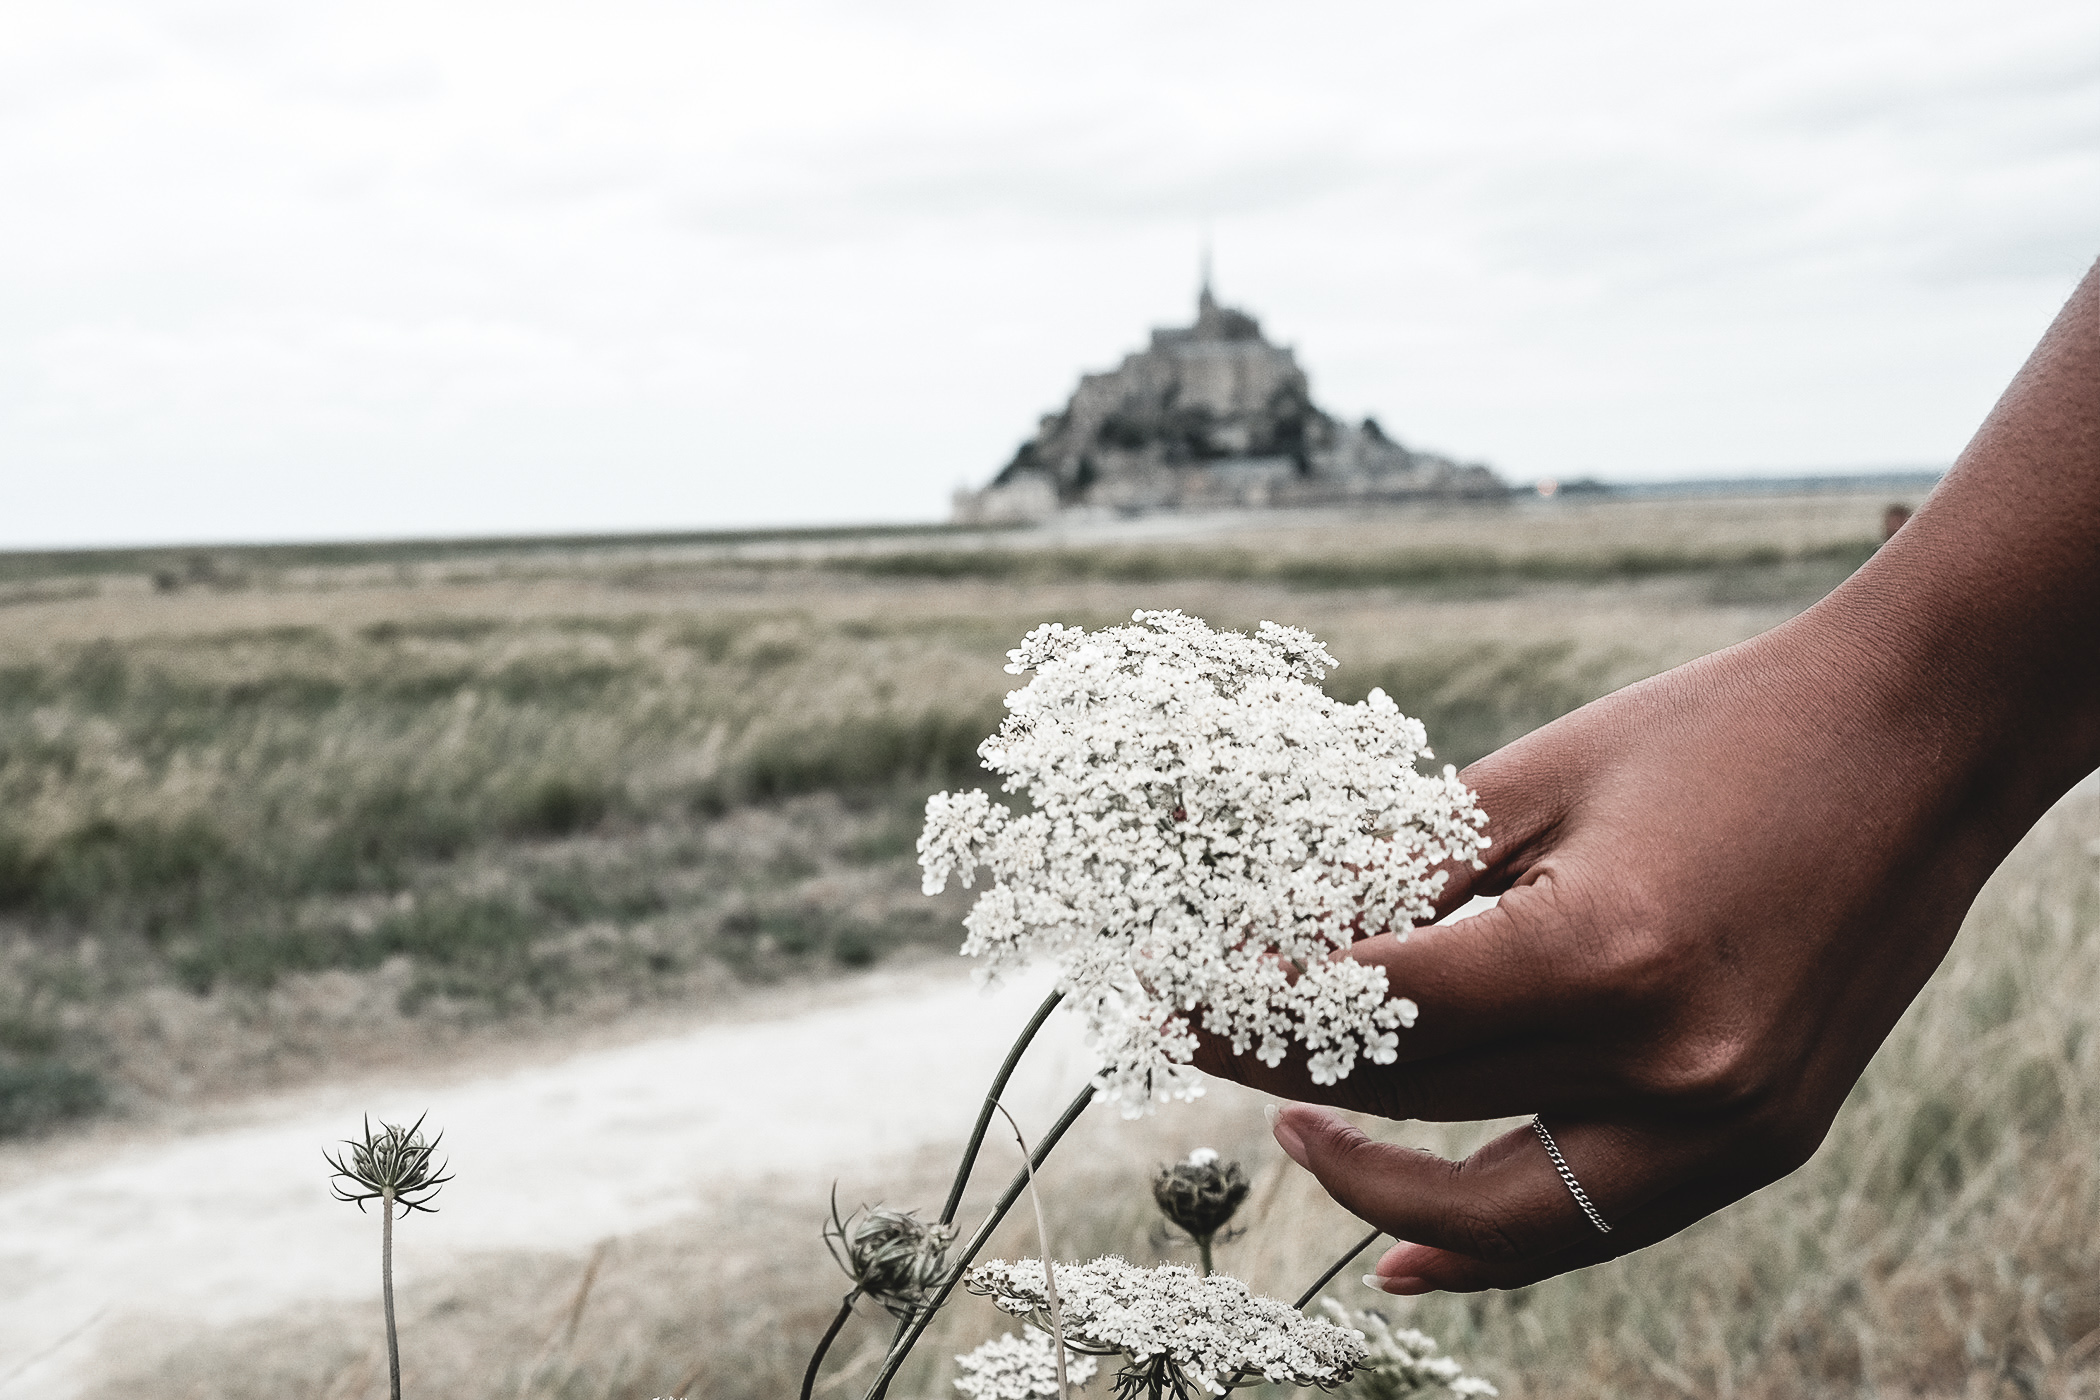 Mont saint Michel, Beautiful place in Normandy, French Casttle. Travel Blog post about a charming little trip